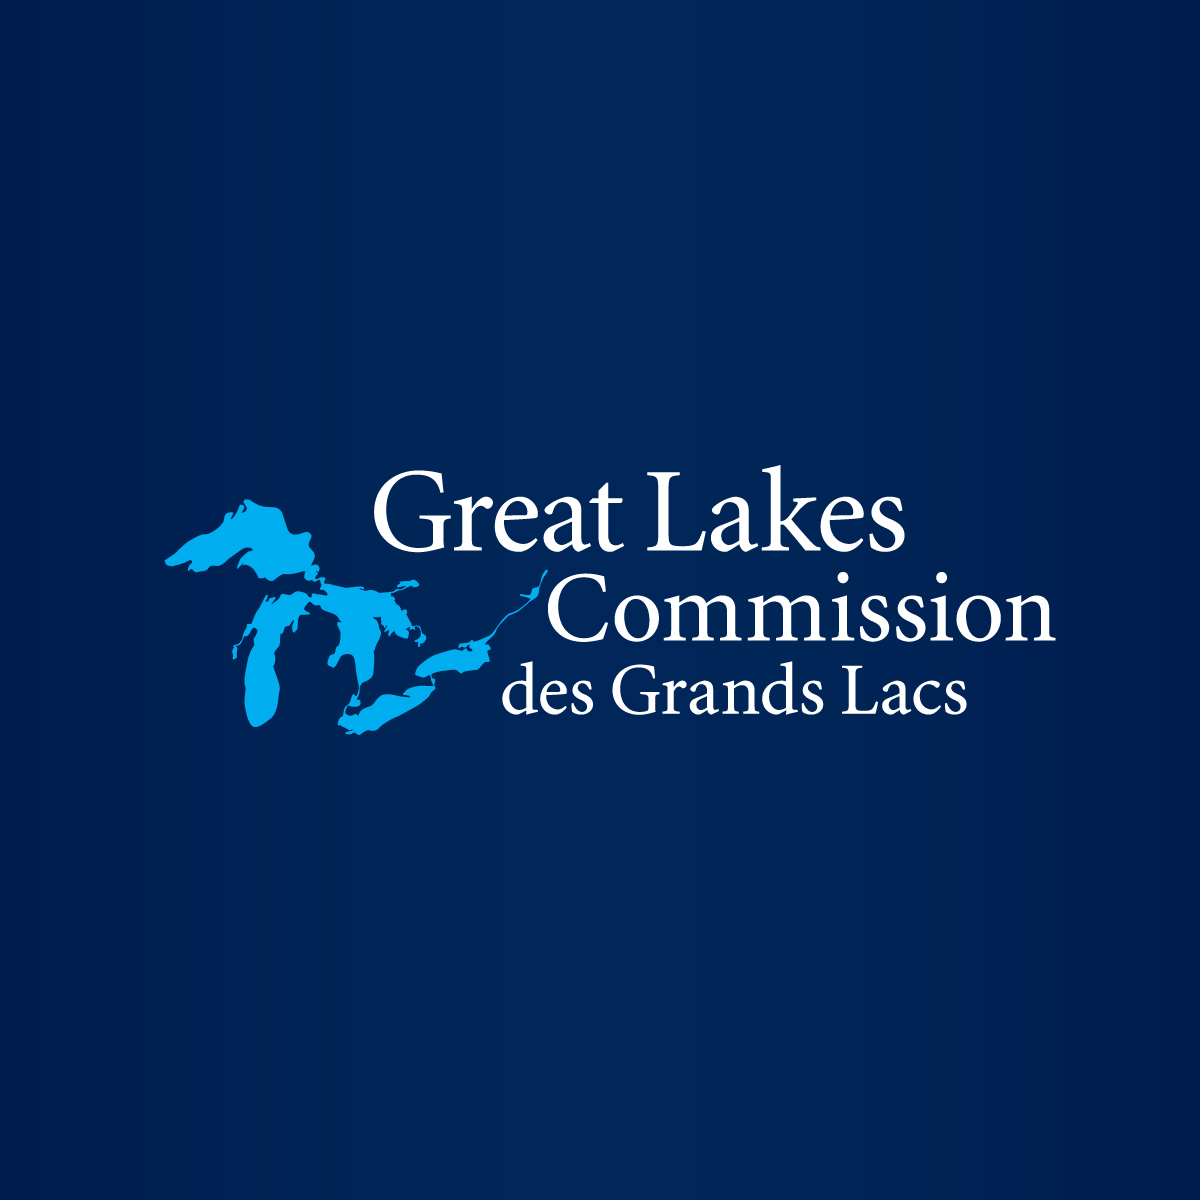 Great Lakes shipping cargo down 5.63% this year